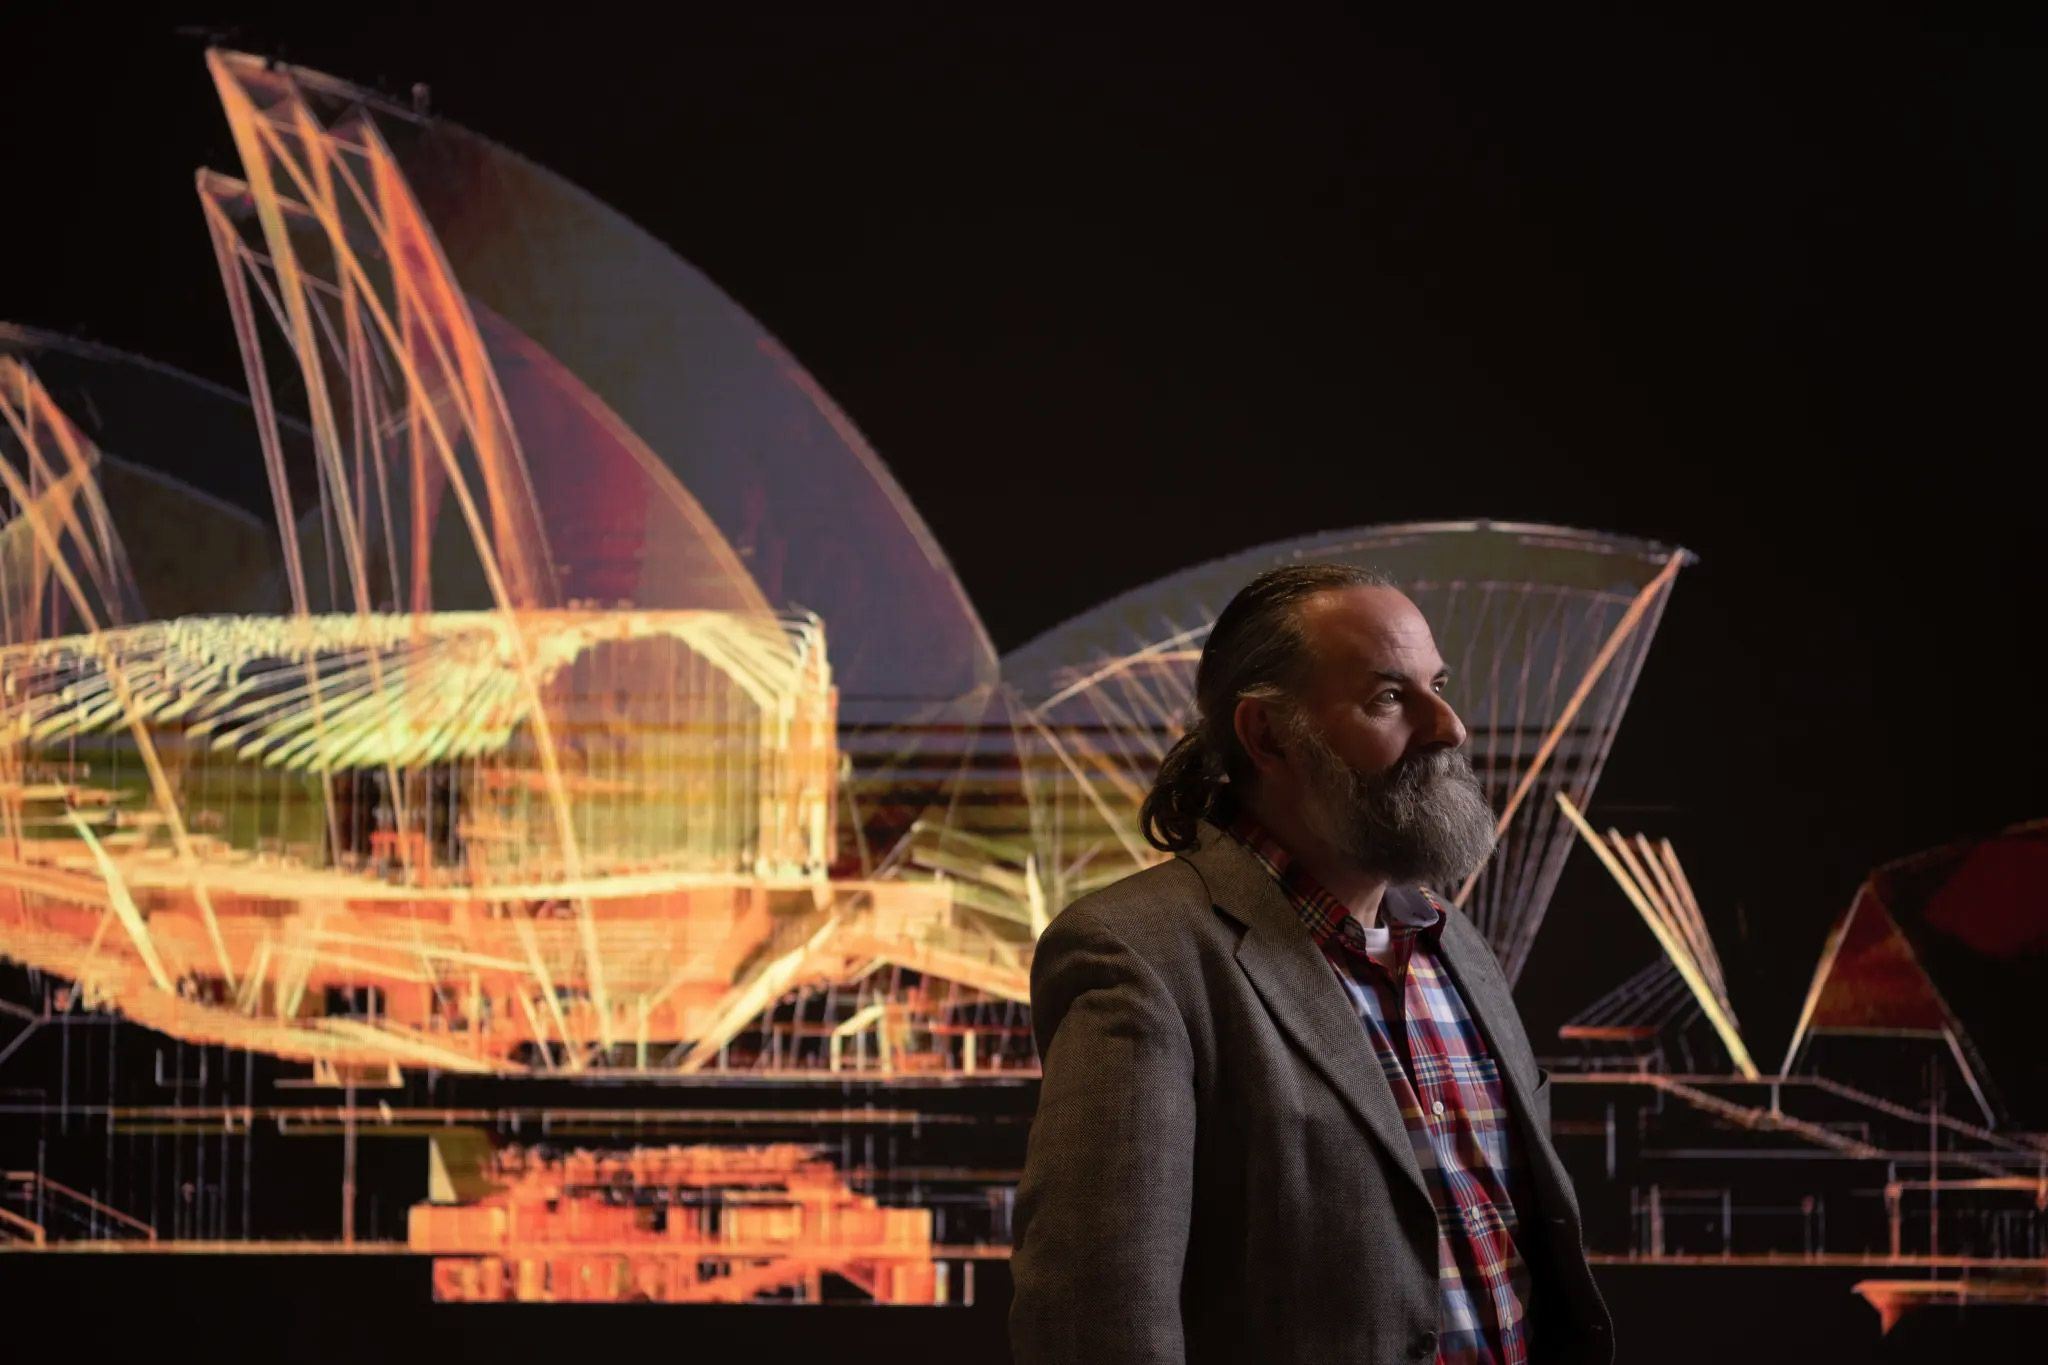 A man standing in profile in front of a digital image of the Sydney Opera House